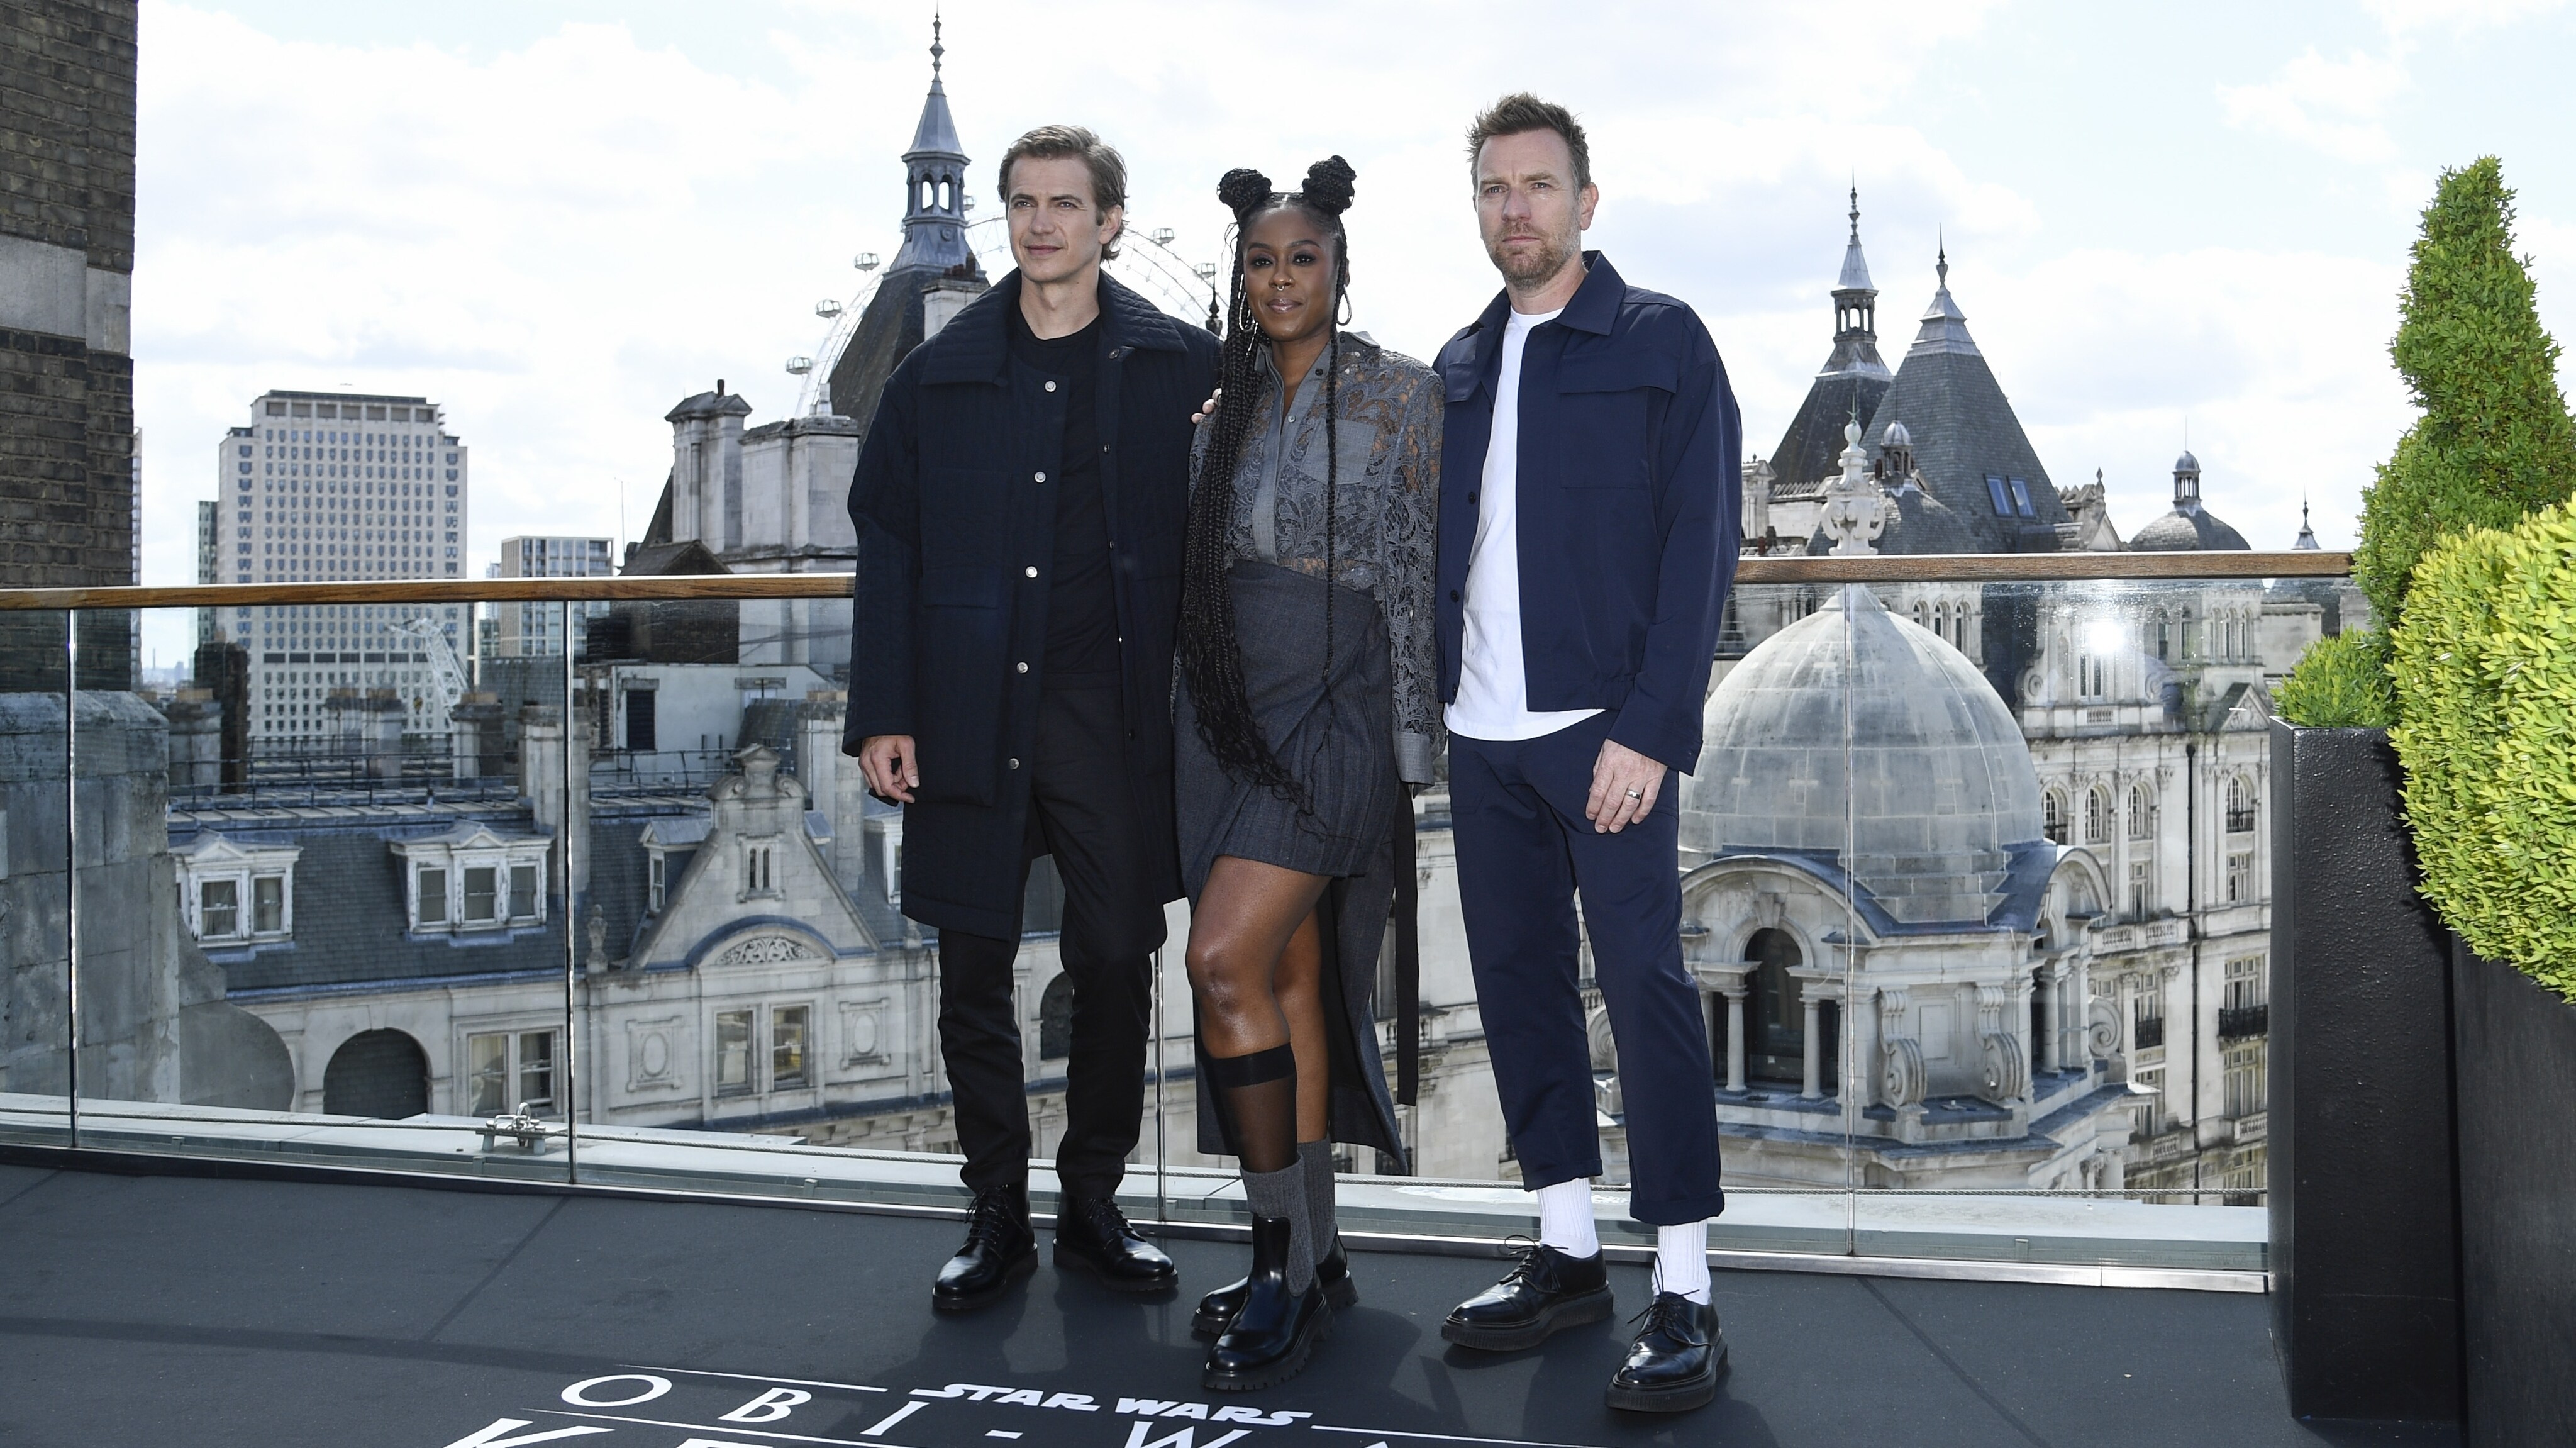 LONDON, ENGLAND - MAY 12: (L-R) Hayden Christensen, Moses Ingram and Ewan McGregor attend the photocall for the new Disney+ limited series "Obi Wan Kenobi" at the Corinthia Hotel on May 12, 2022 in London, England.  (Photo by Gareth Cattermole/Getty Images for Disney) Obi-Wan Kenobi will be exclusively available on Disney+ from May 27.